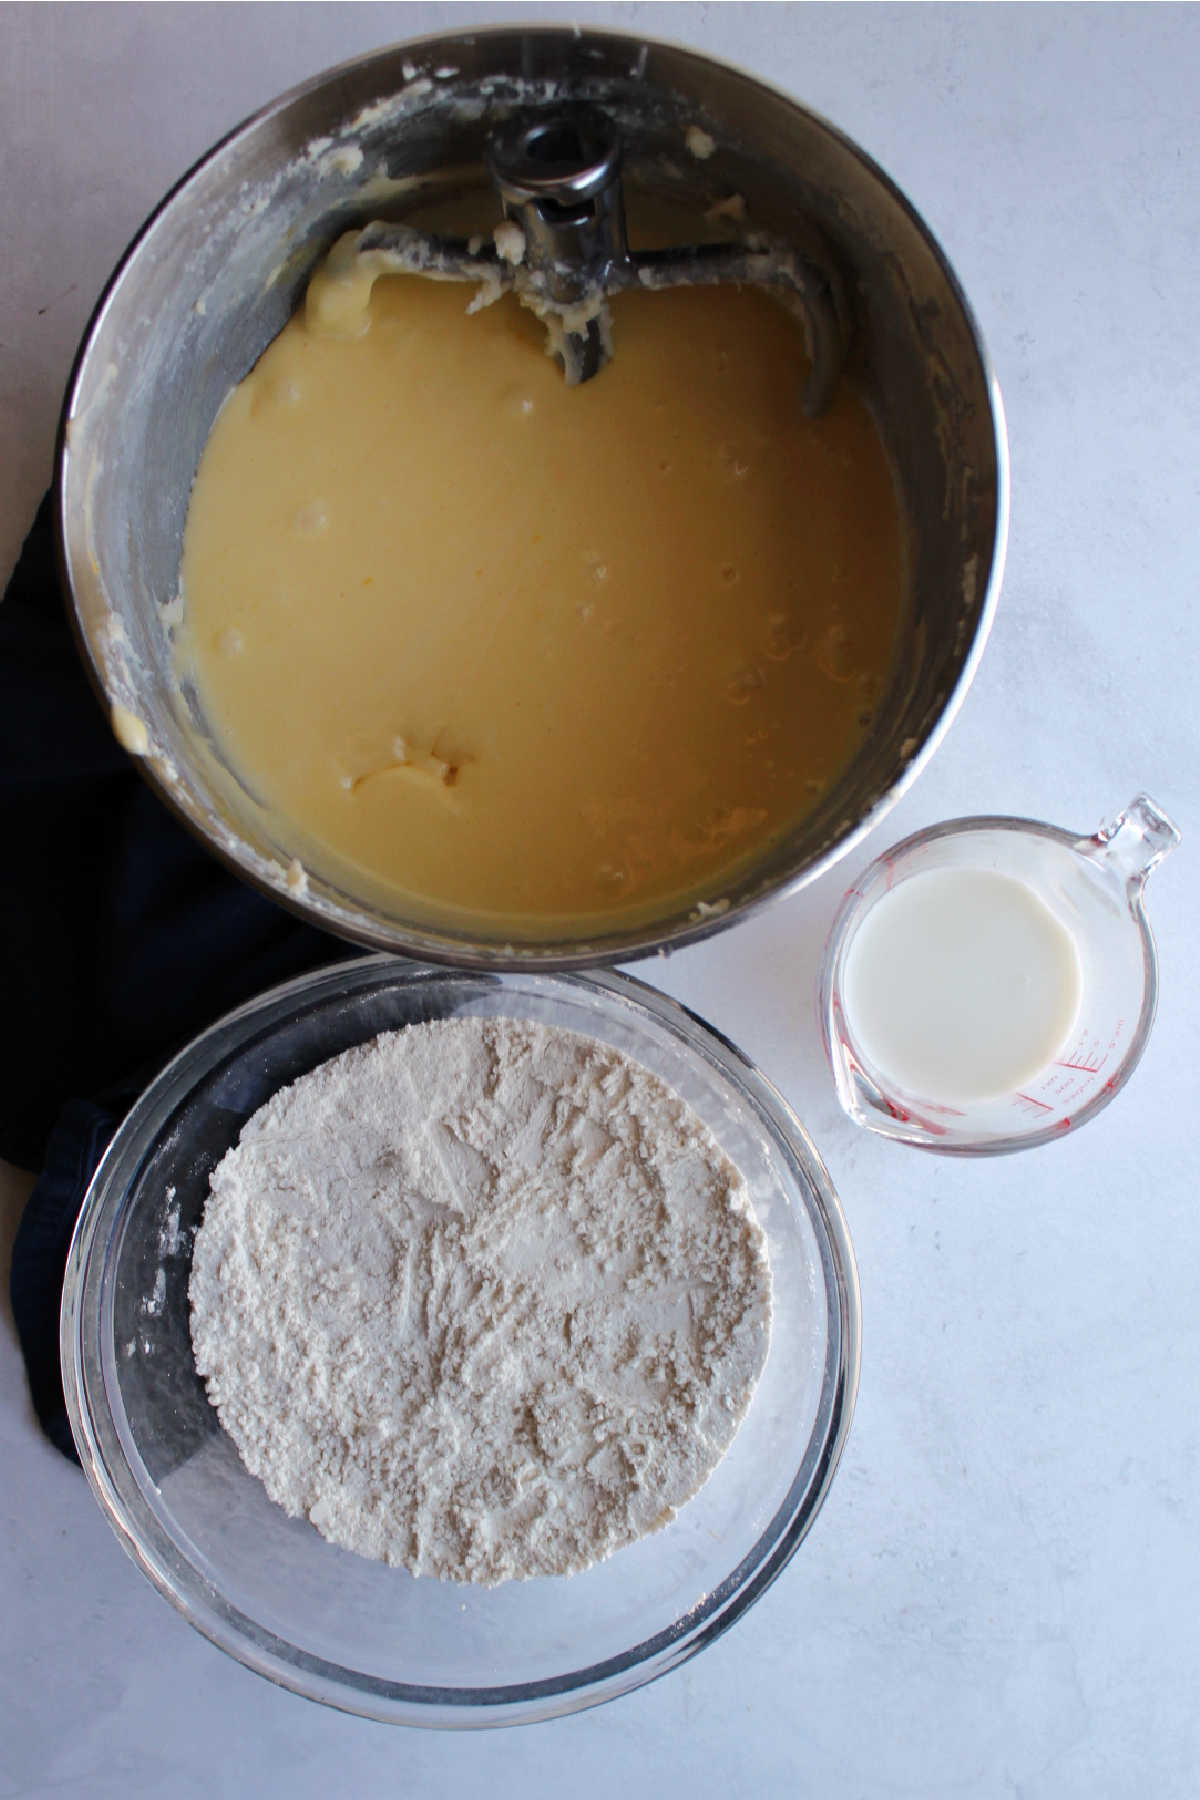 Wet and dry ingredients ready to be made into petit four cake batter. 